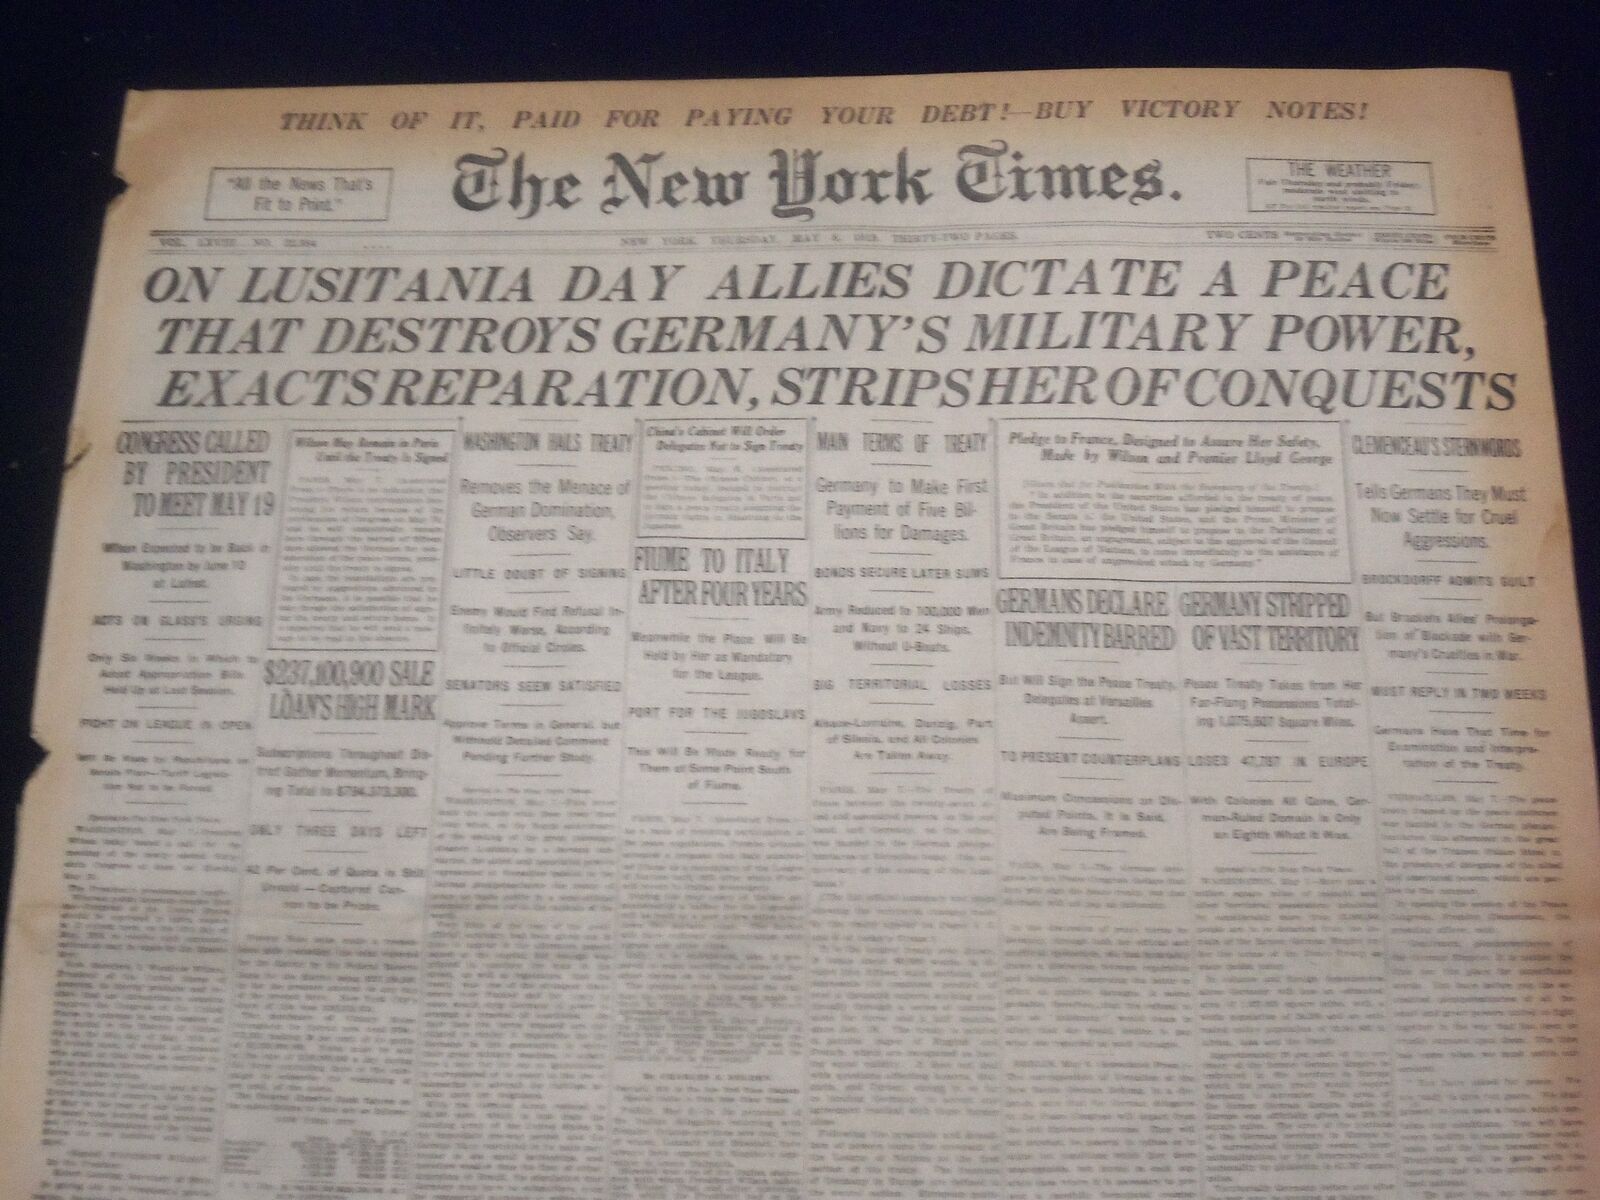 1919 MAY 8 N.Y. TIMES-ON LUSITANIA DAY ALLIES DICTATE A PEACE-BAUM DEAD- NT 9241